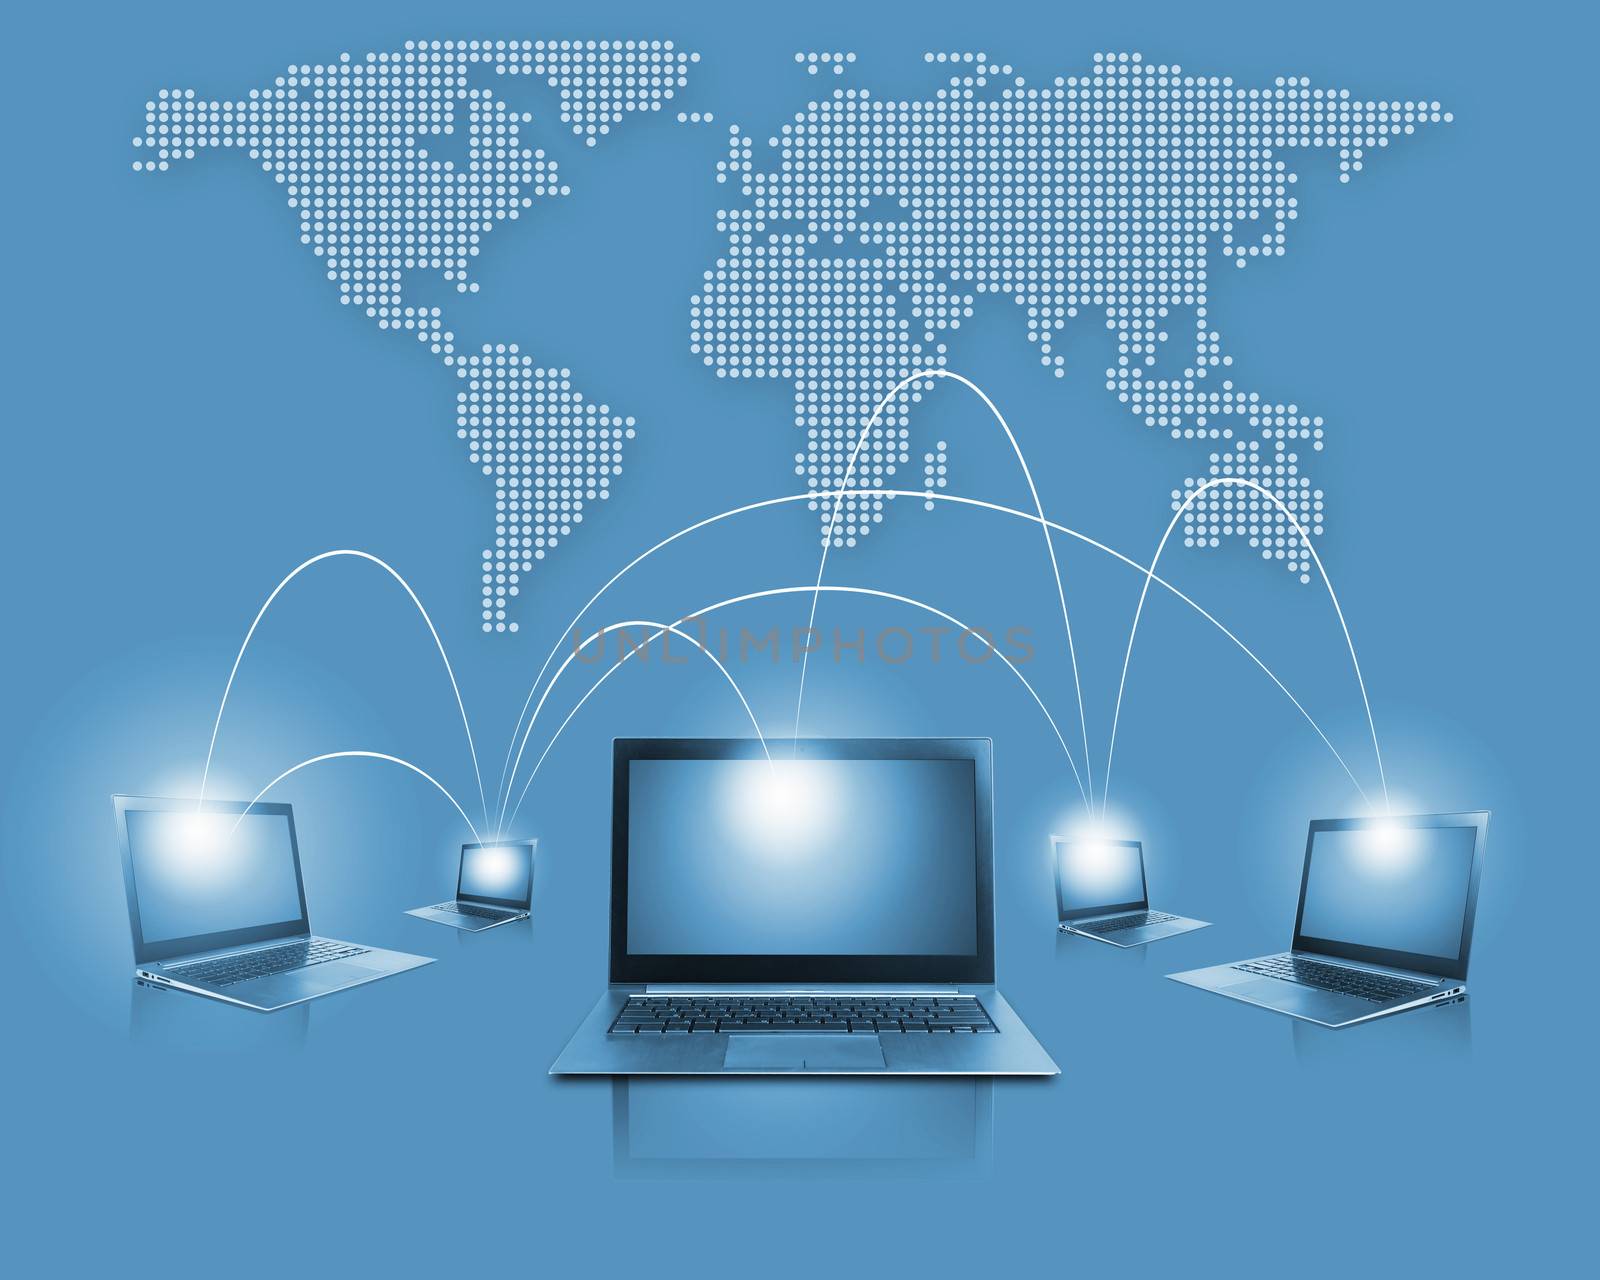 Laptops against world map background. Connection and cooperation